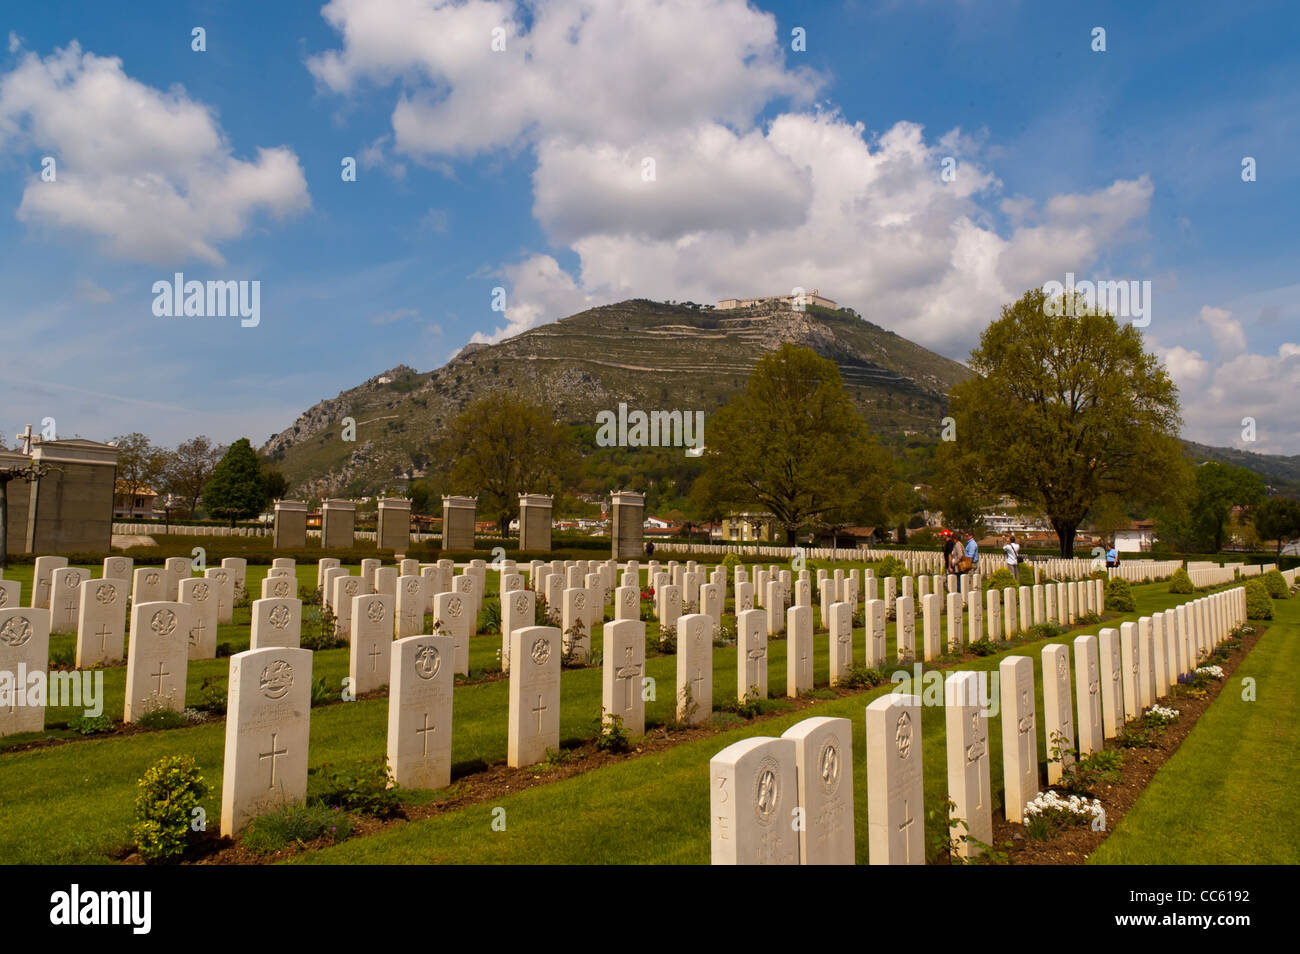 Monte Cassino monastery is on the top of a hill near Rome in Italy and the graves of the soldiers who took part lie at its feet. Stock Photo